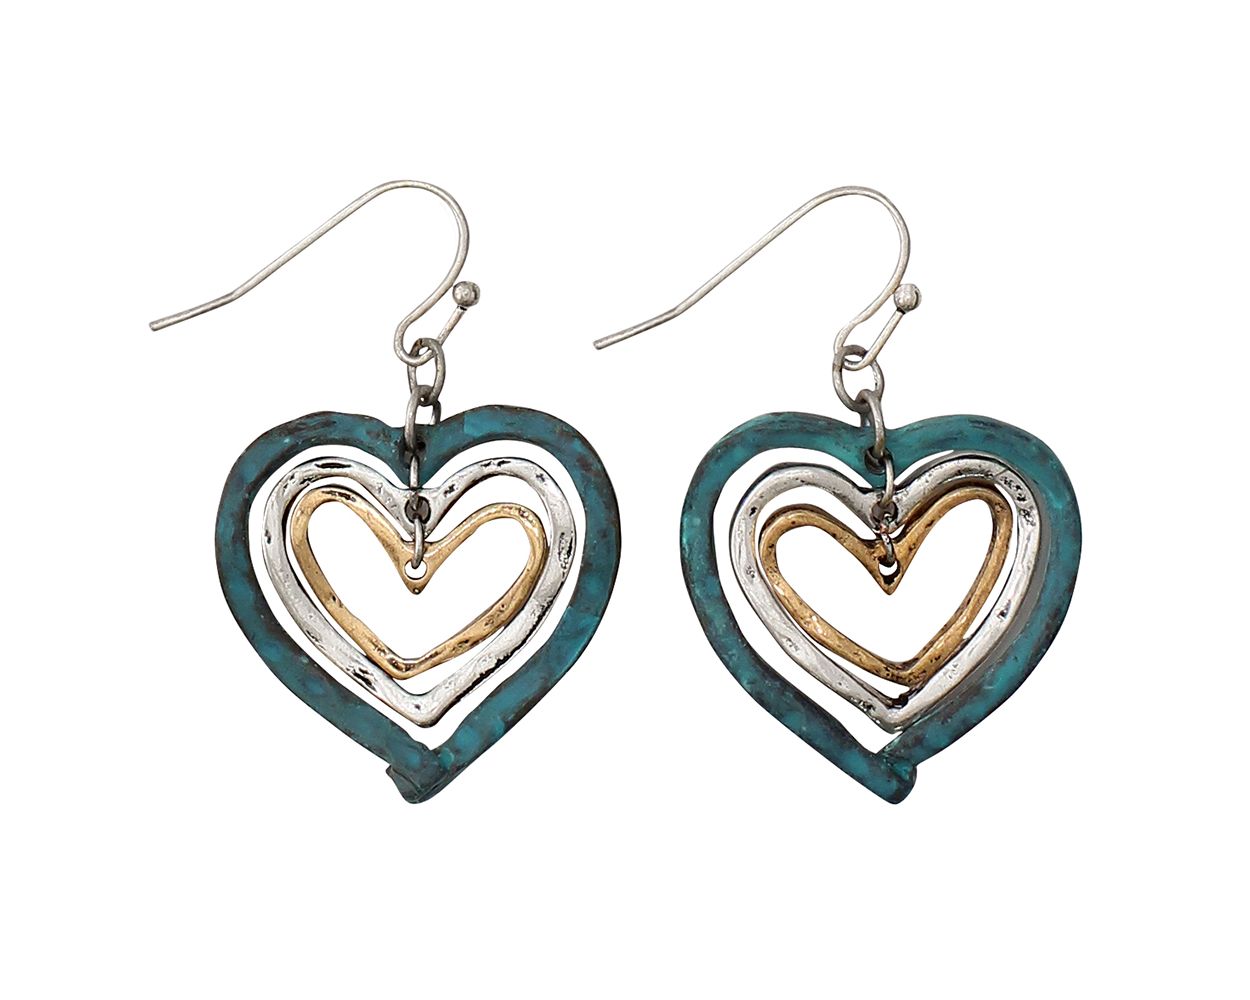 Silver, Gold and Patina Hearts Earrings